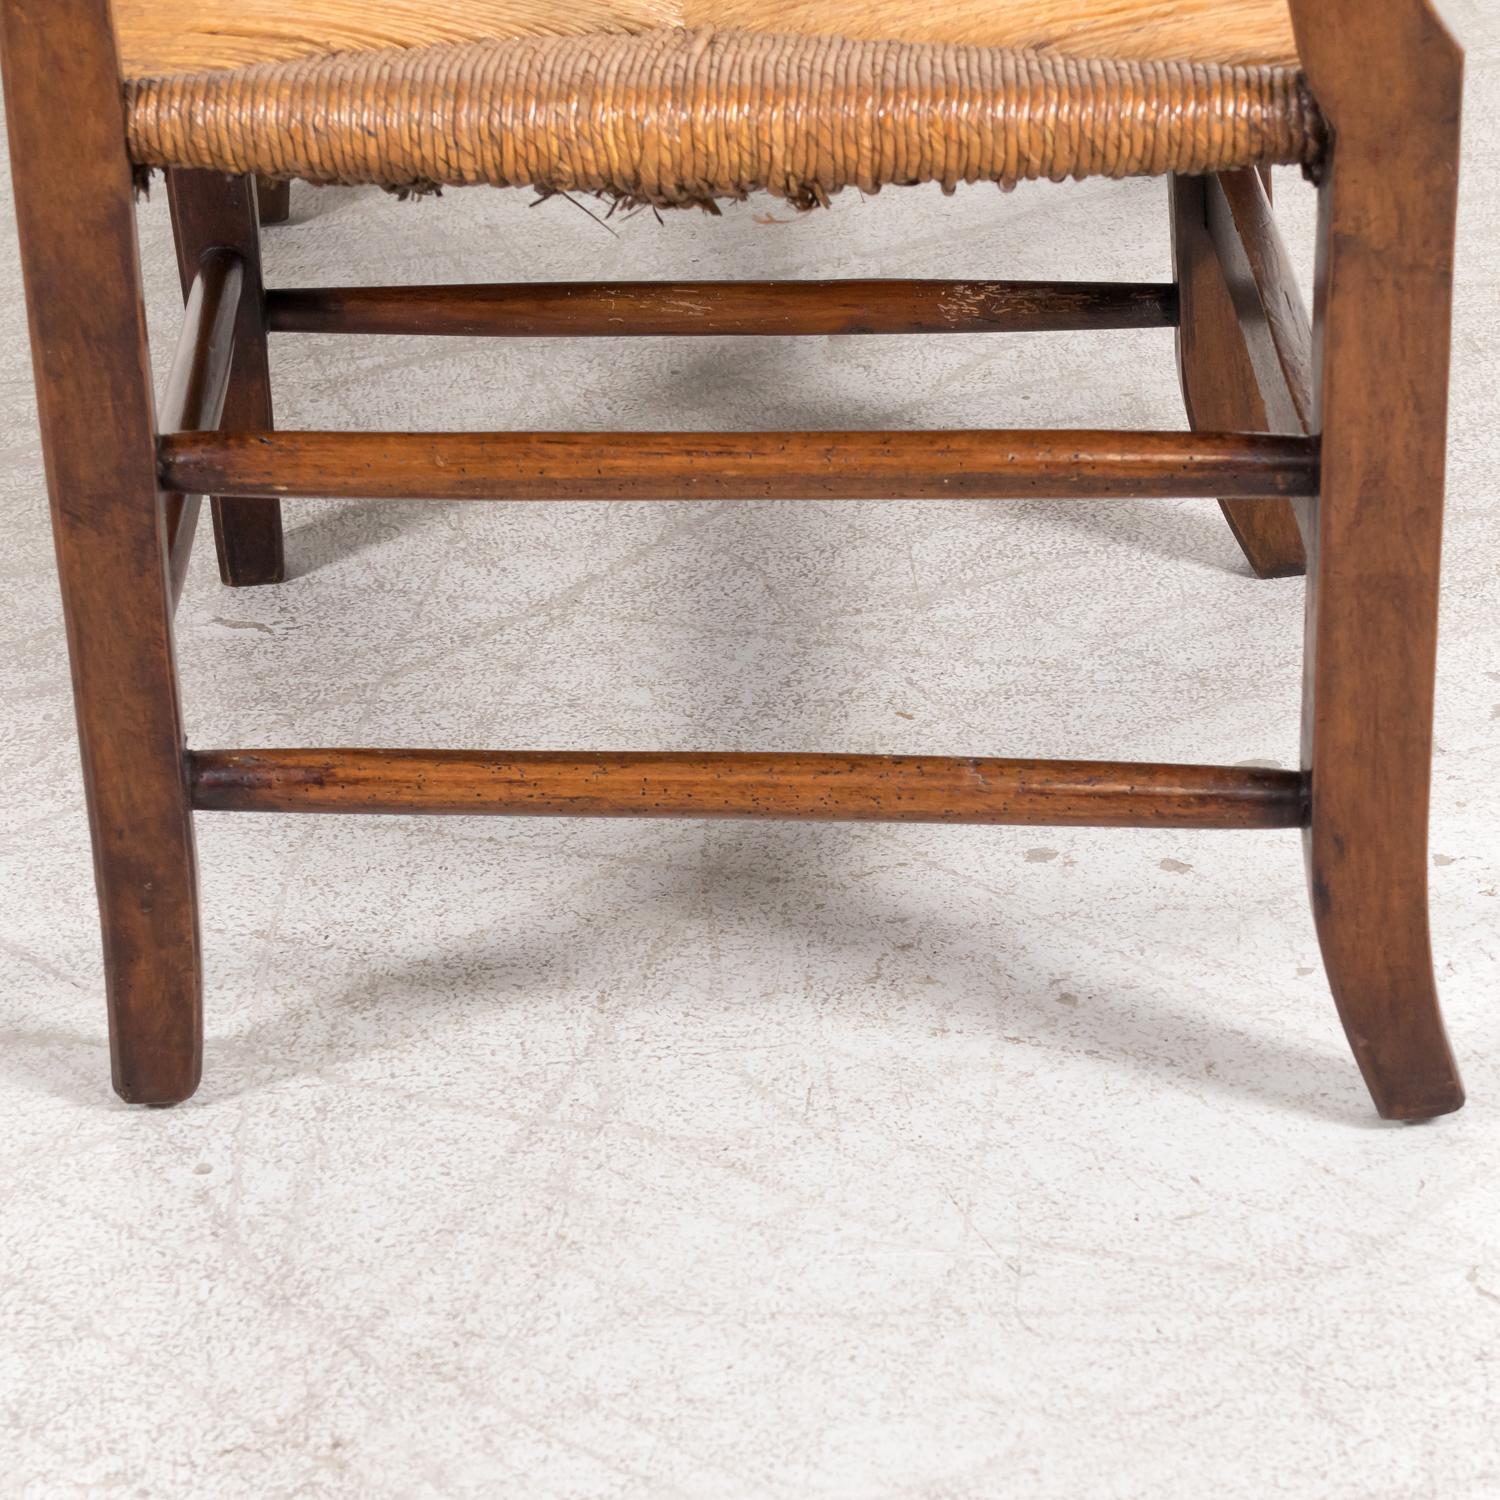 Mid-19th Century French Radassier or Ladder Back Rush Seat Bench 12